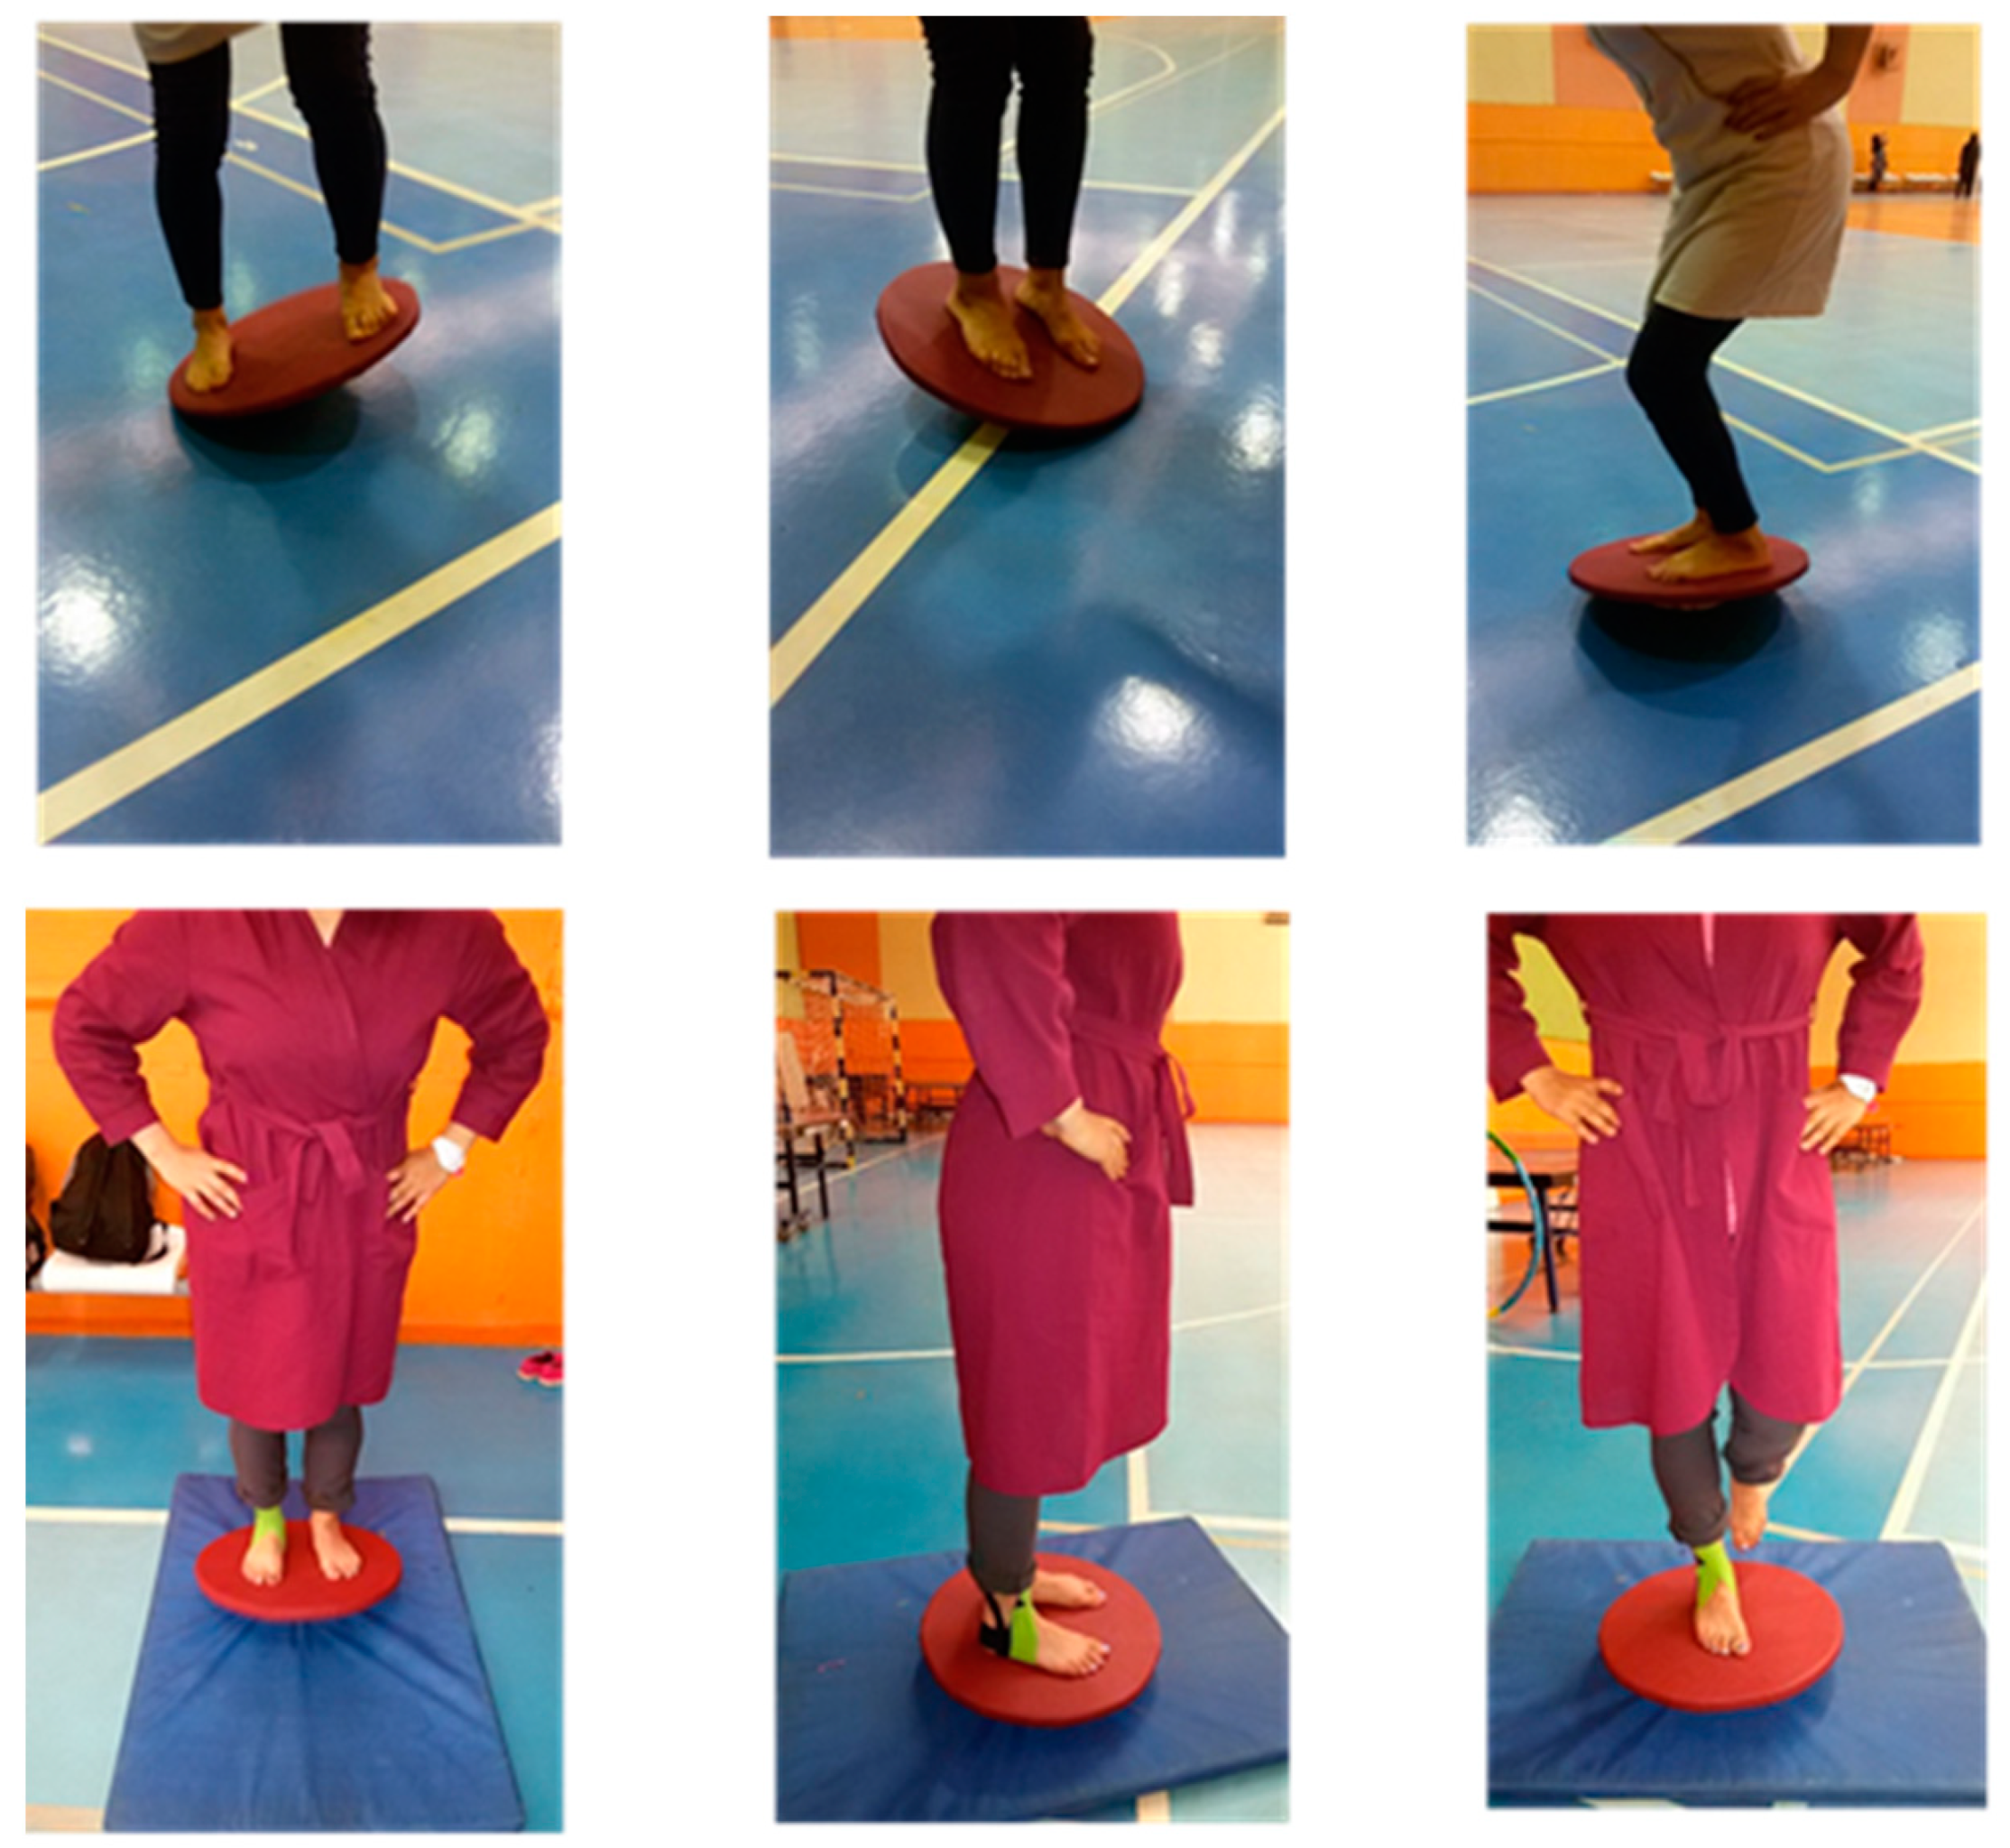 Life | Free Full-Text | Effect of Combined Balance Exercises and Kinesio  Taping on Balance, Postural Stability, and Severity of Ankle Instability in  Female Athletes with Functional Ankle Instability